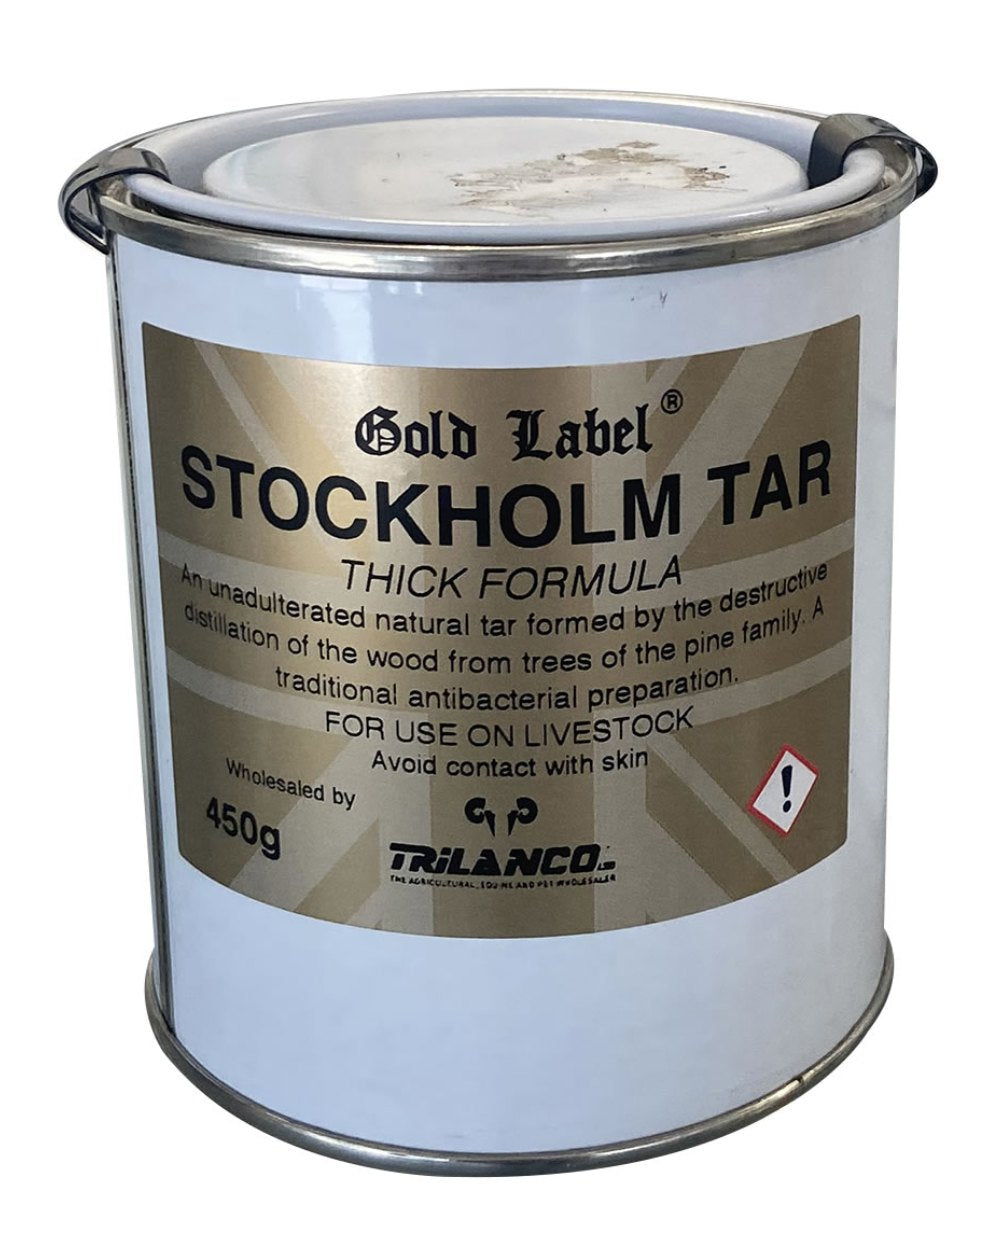 Gold Label Stockholm Tar Thick On A White Background